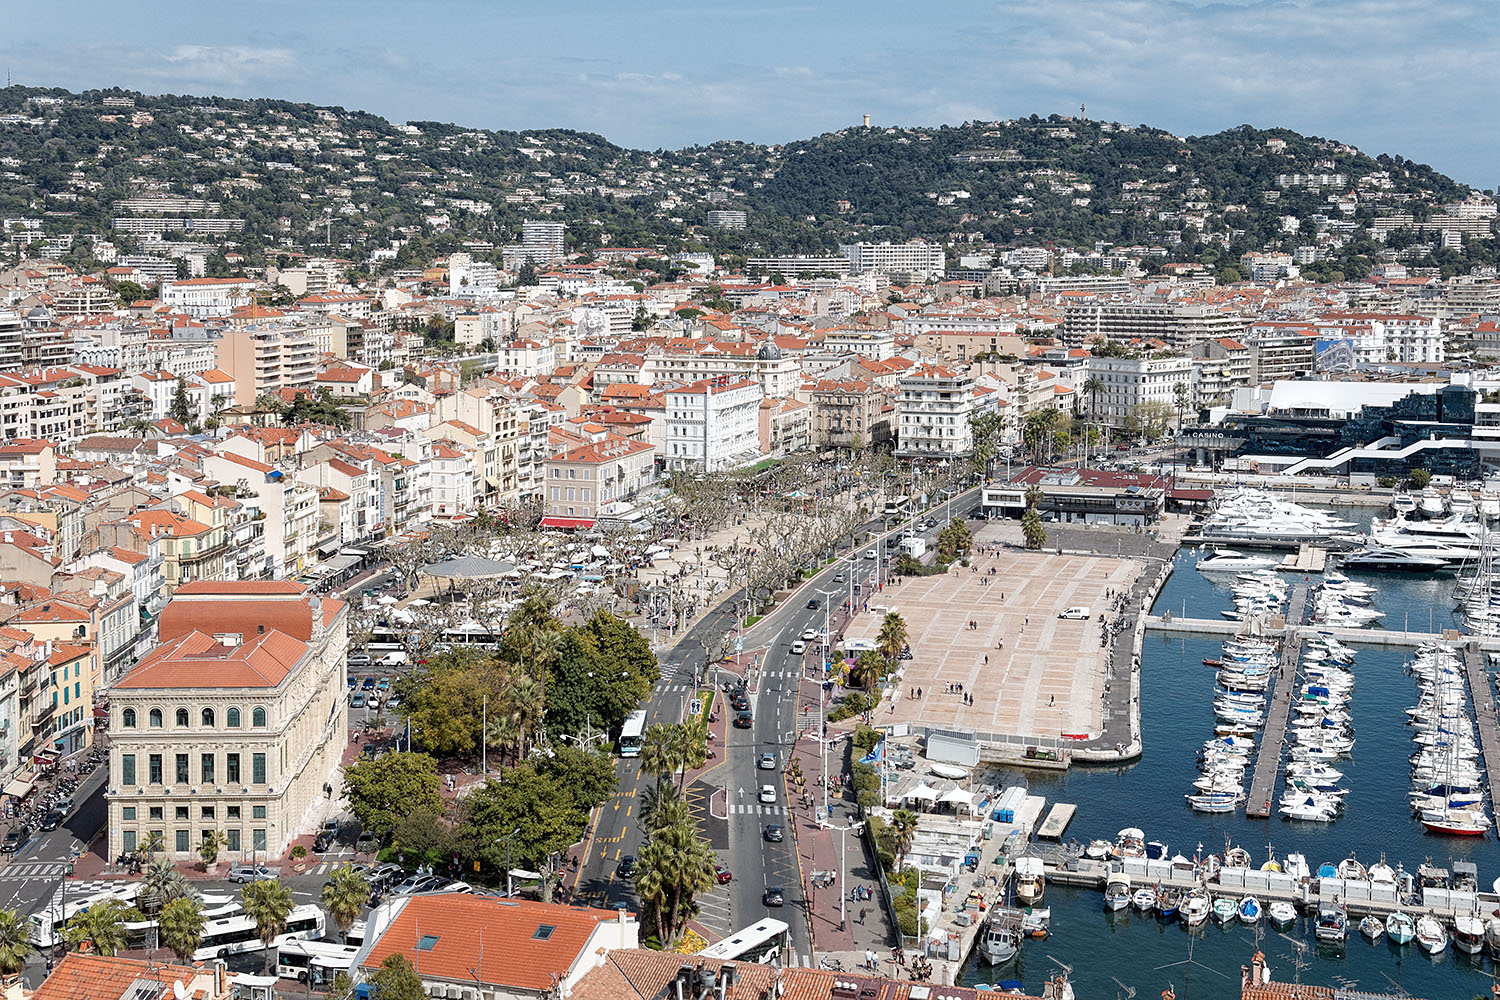 Looking into the heart of Cannes, town hall on the left, harbor and casino on the right